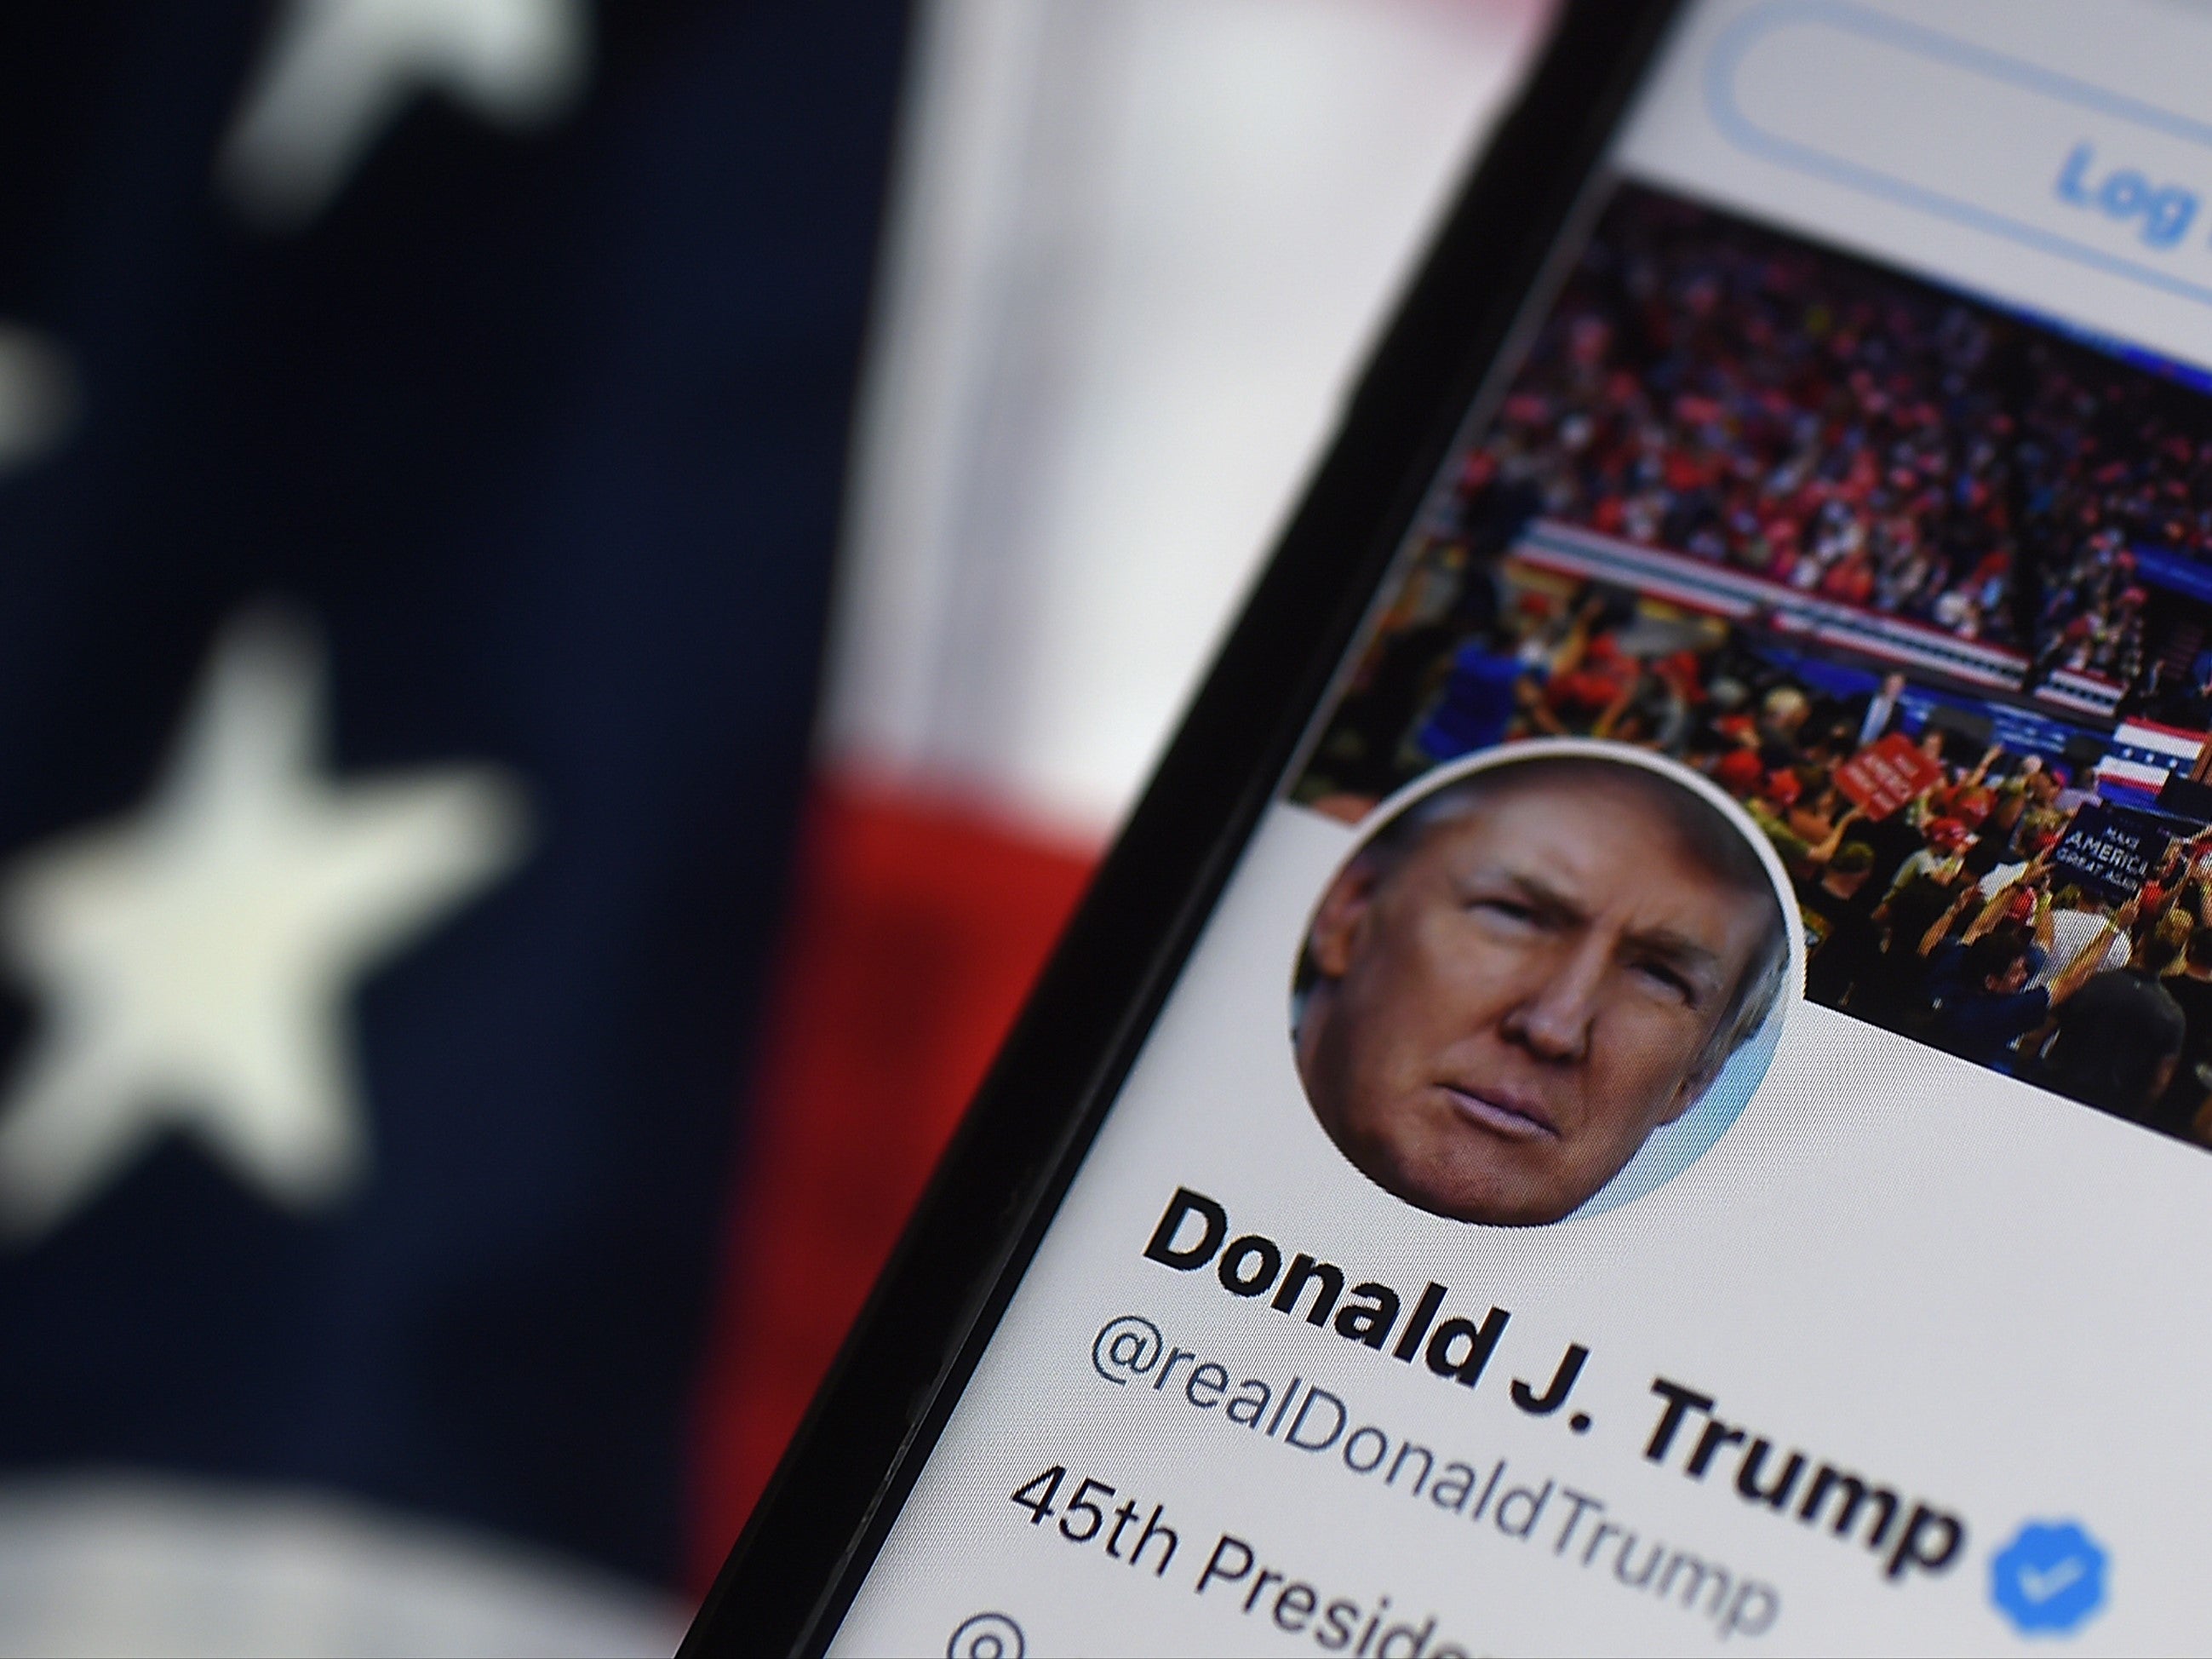 Twitter will not suspend or remove Trump’s account while he remains in office due to its rules relating to public interest